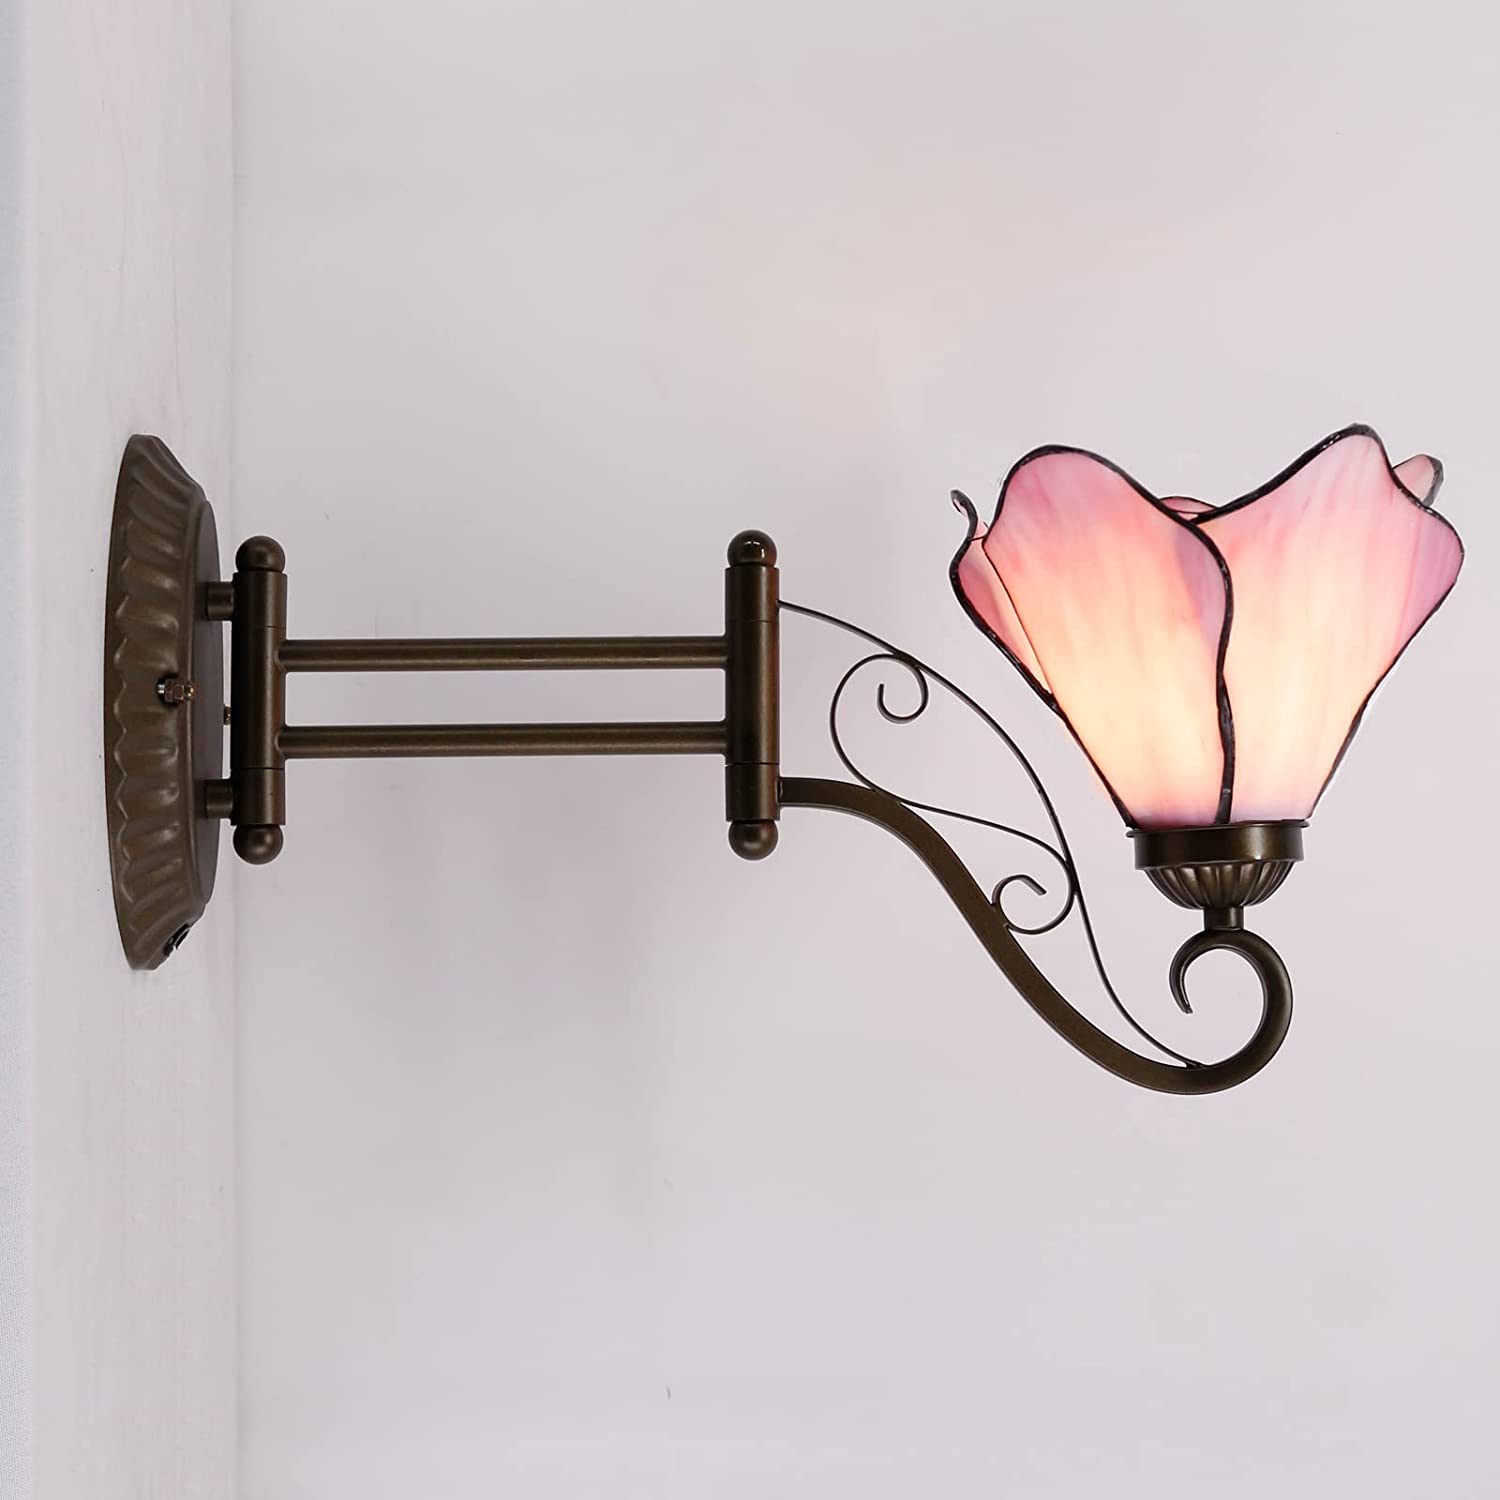 WERFACTORY Tiffany Wall Sconce Lamp W8L19 Inch Swing Arm Up Down Light Pink Stained Glass Lotus Shade S147 Living Room Bedroom Office Study Antique Metal